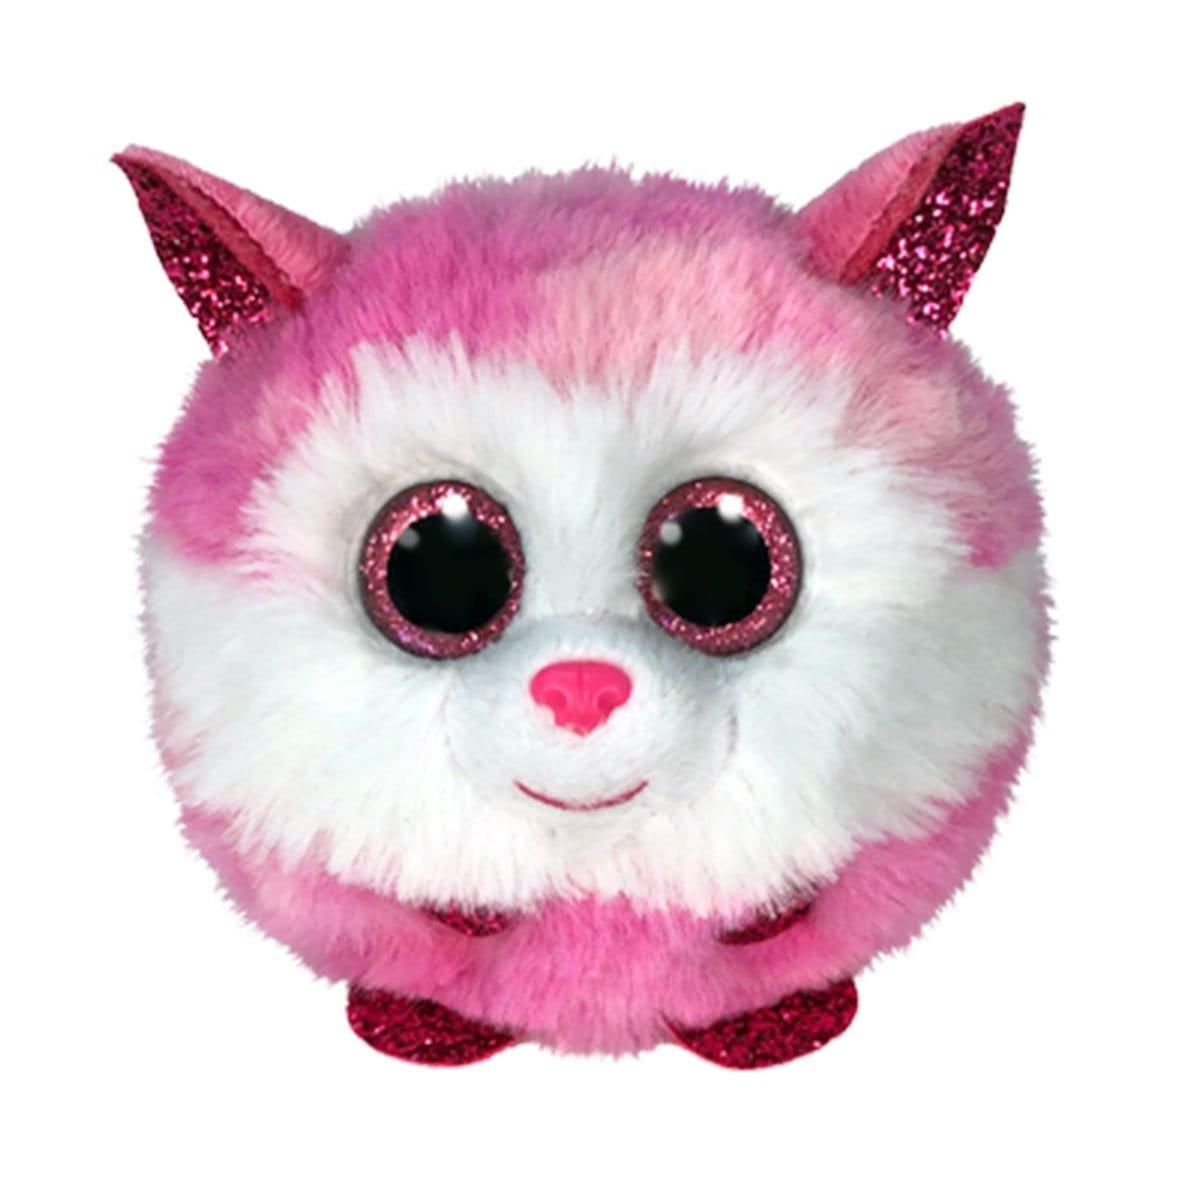 TY Beanie Boo Plush, Sissy, 6 Inches, 1 Count